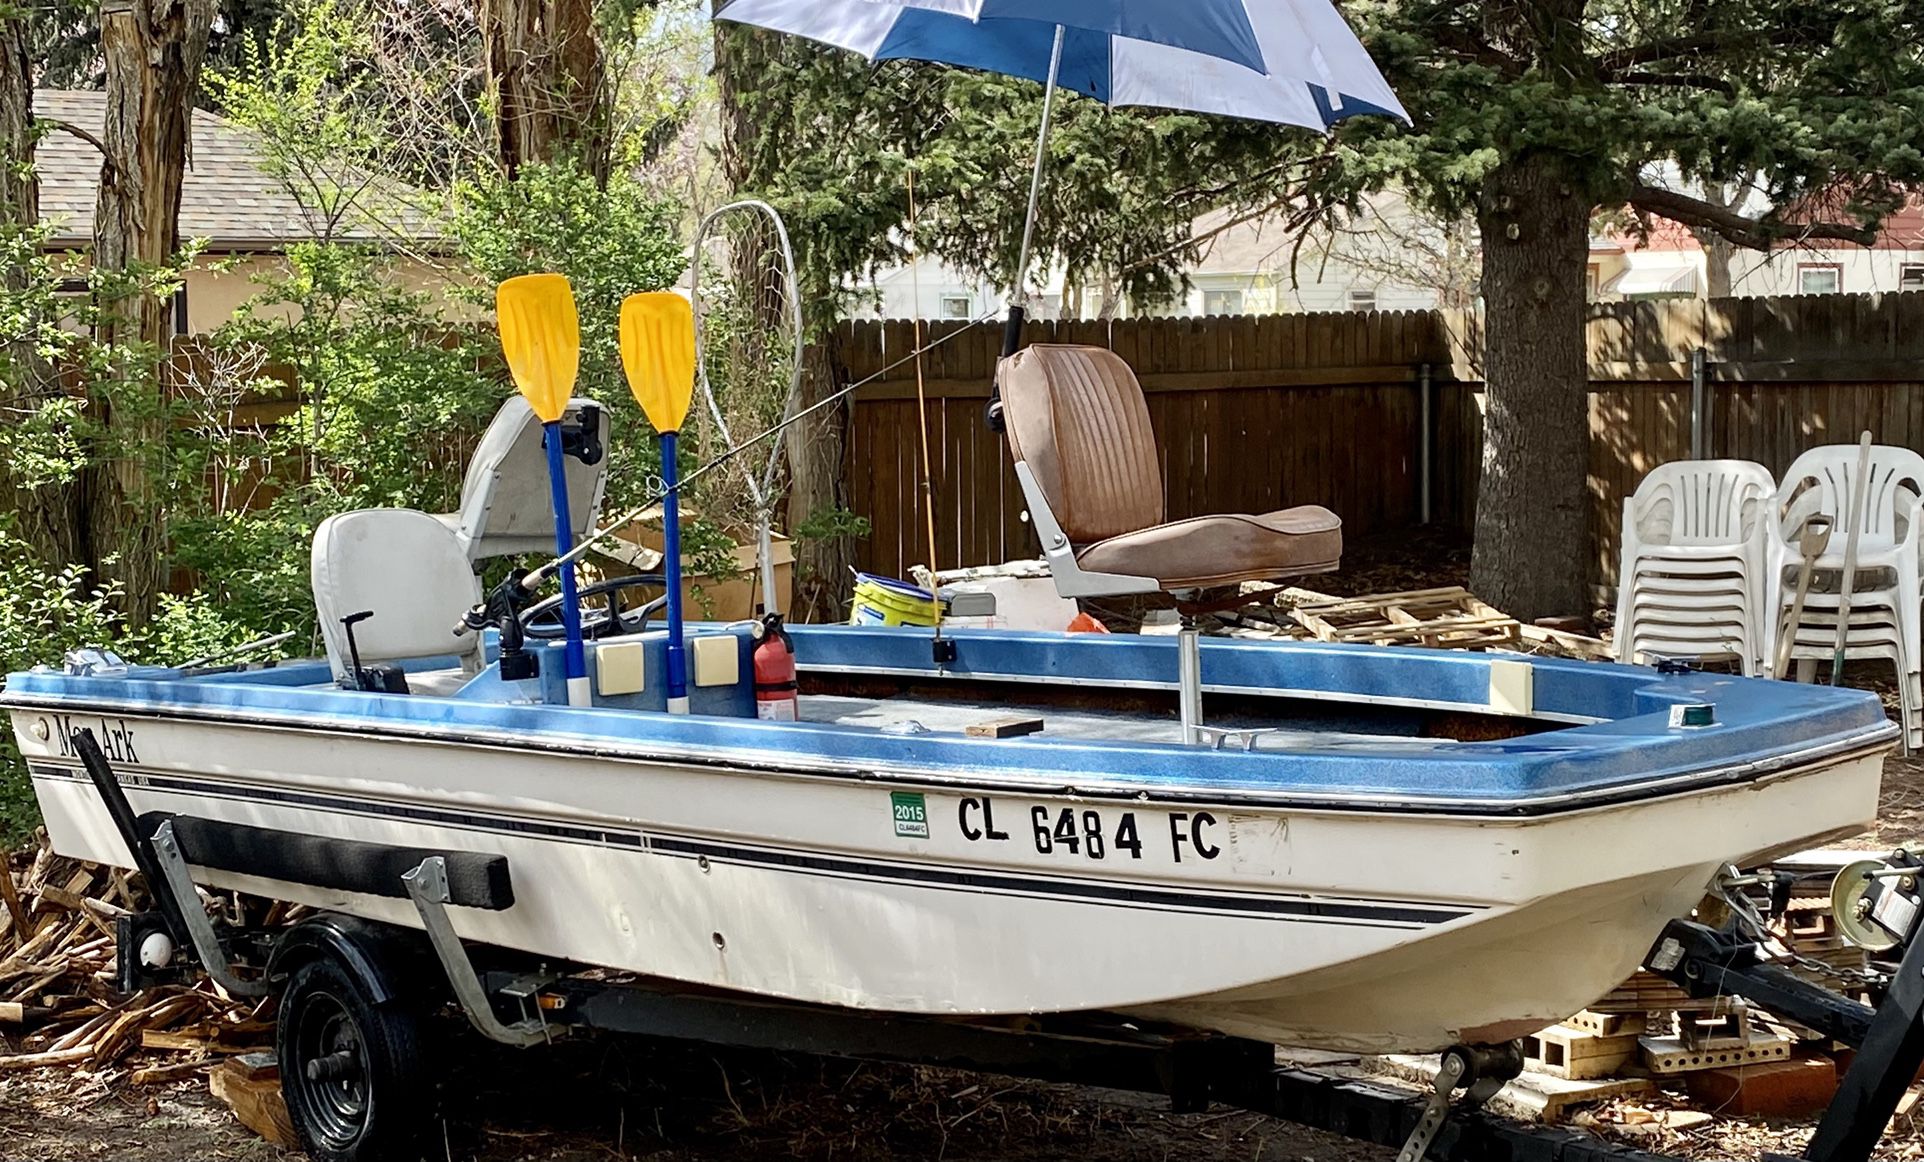 Photo 1975 MonArk Bassin Boat WTitle. Comes With 850 Merc And 650 Merc Motors And The Trailer.